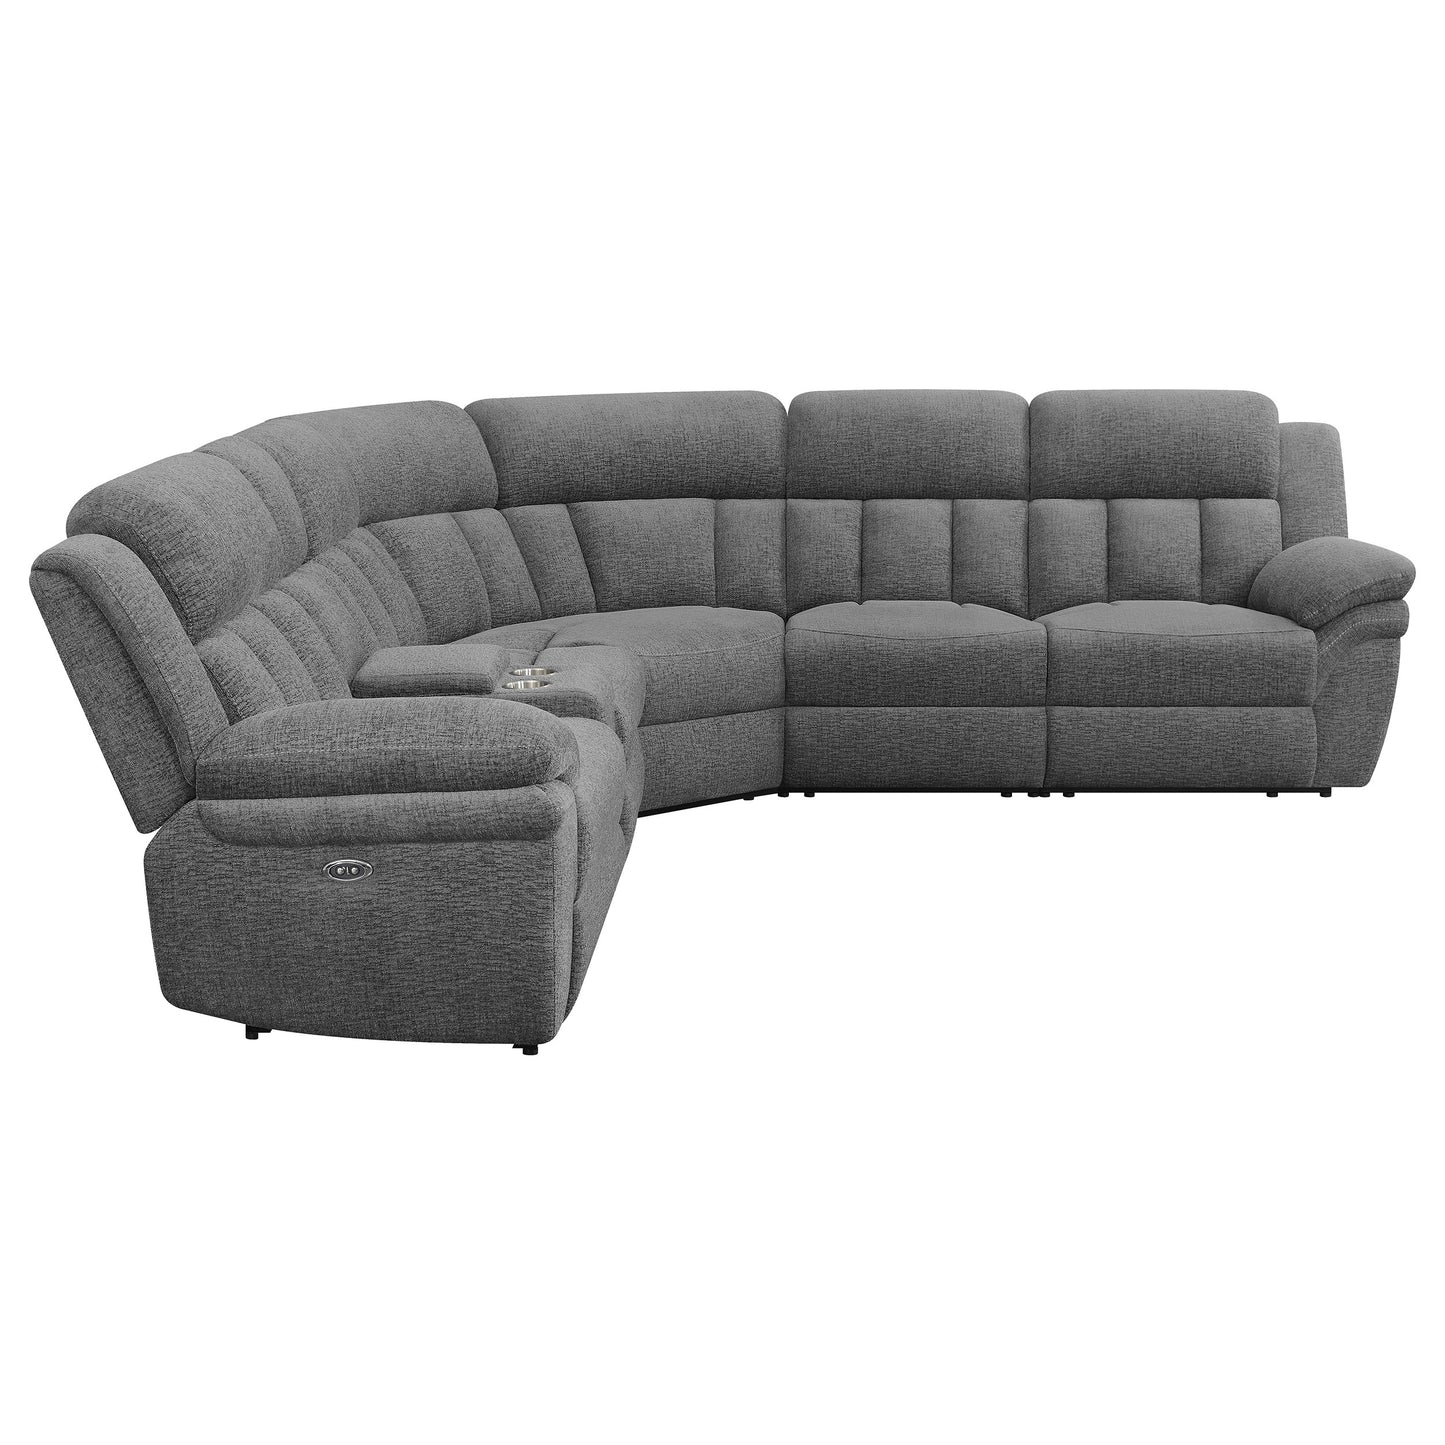 6 pc power sectional